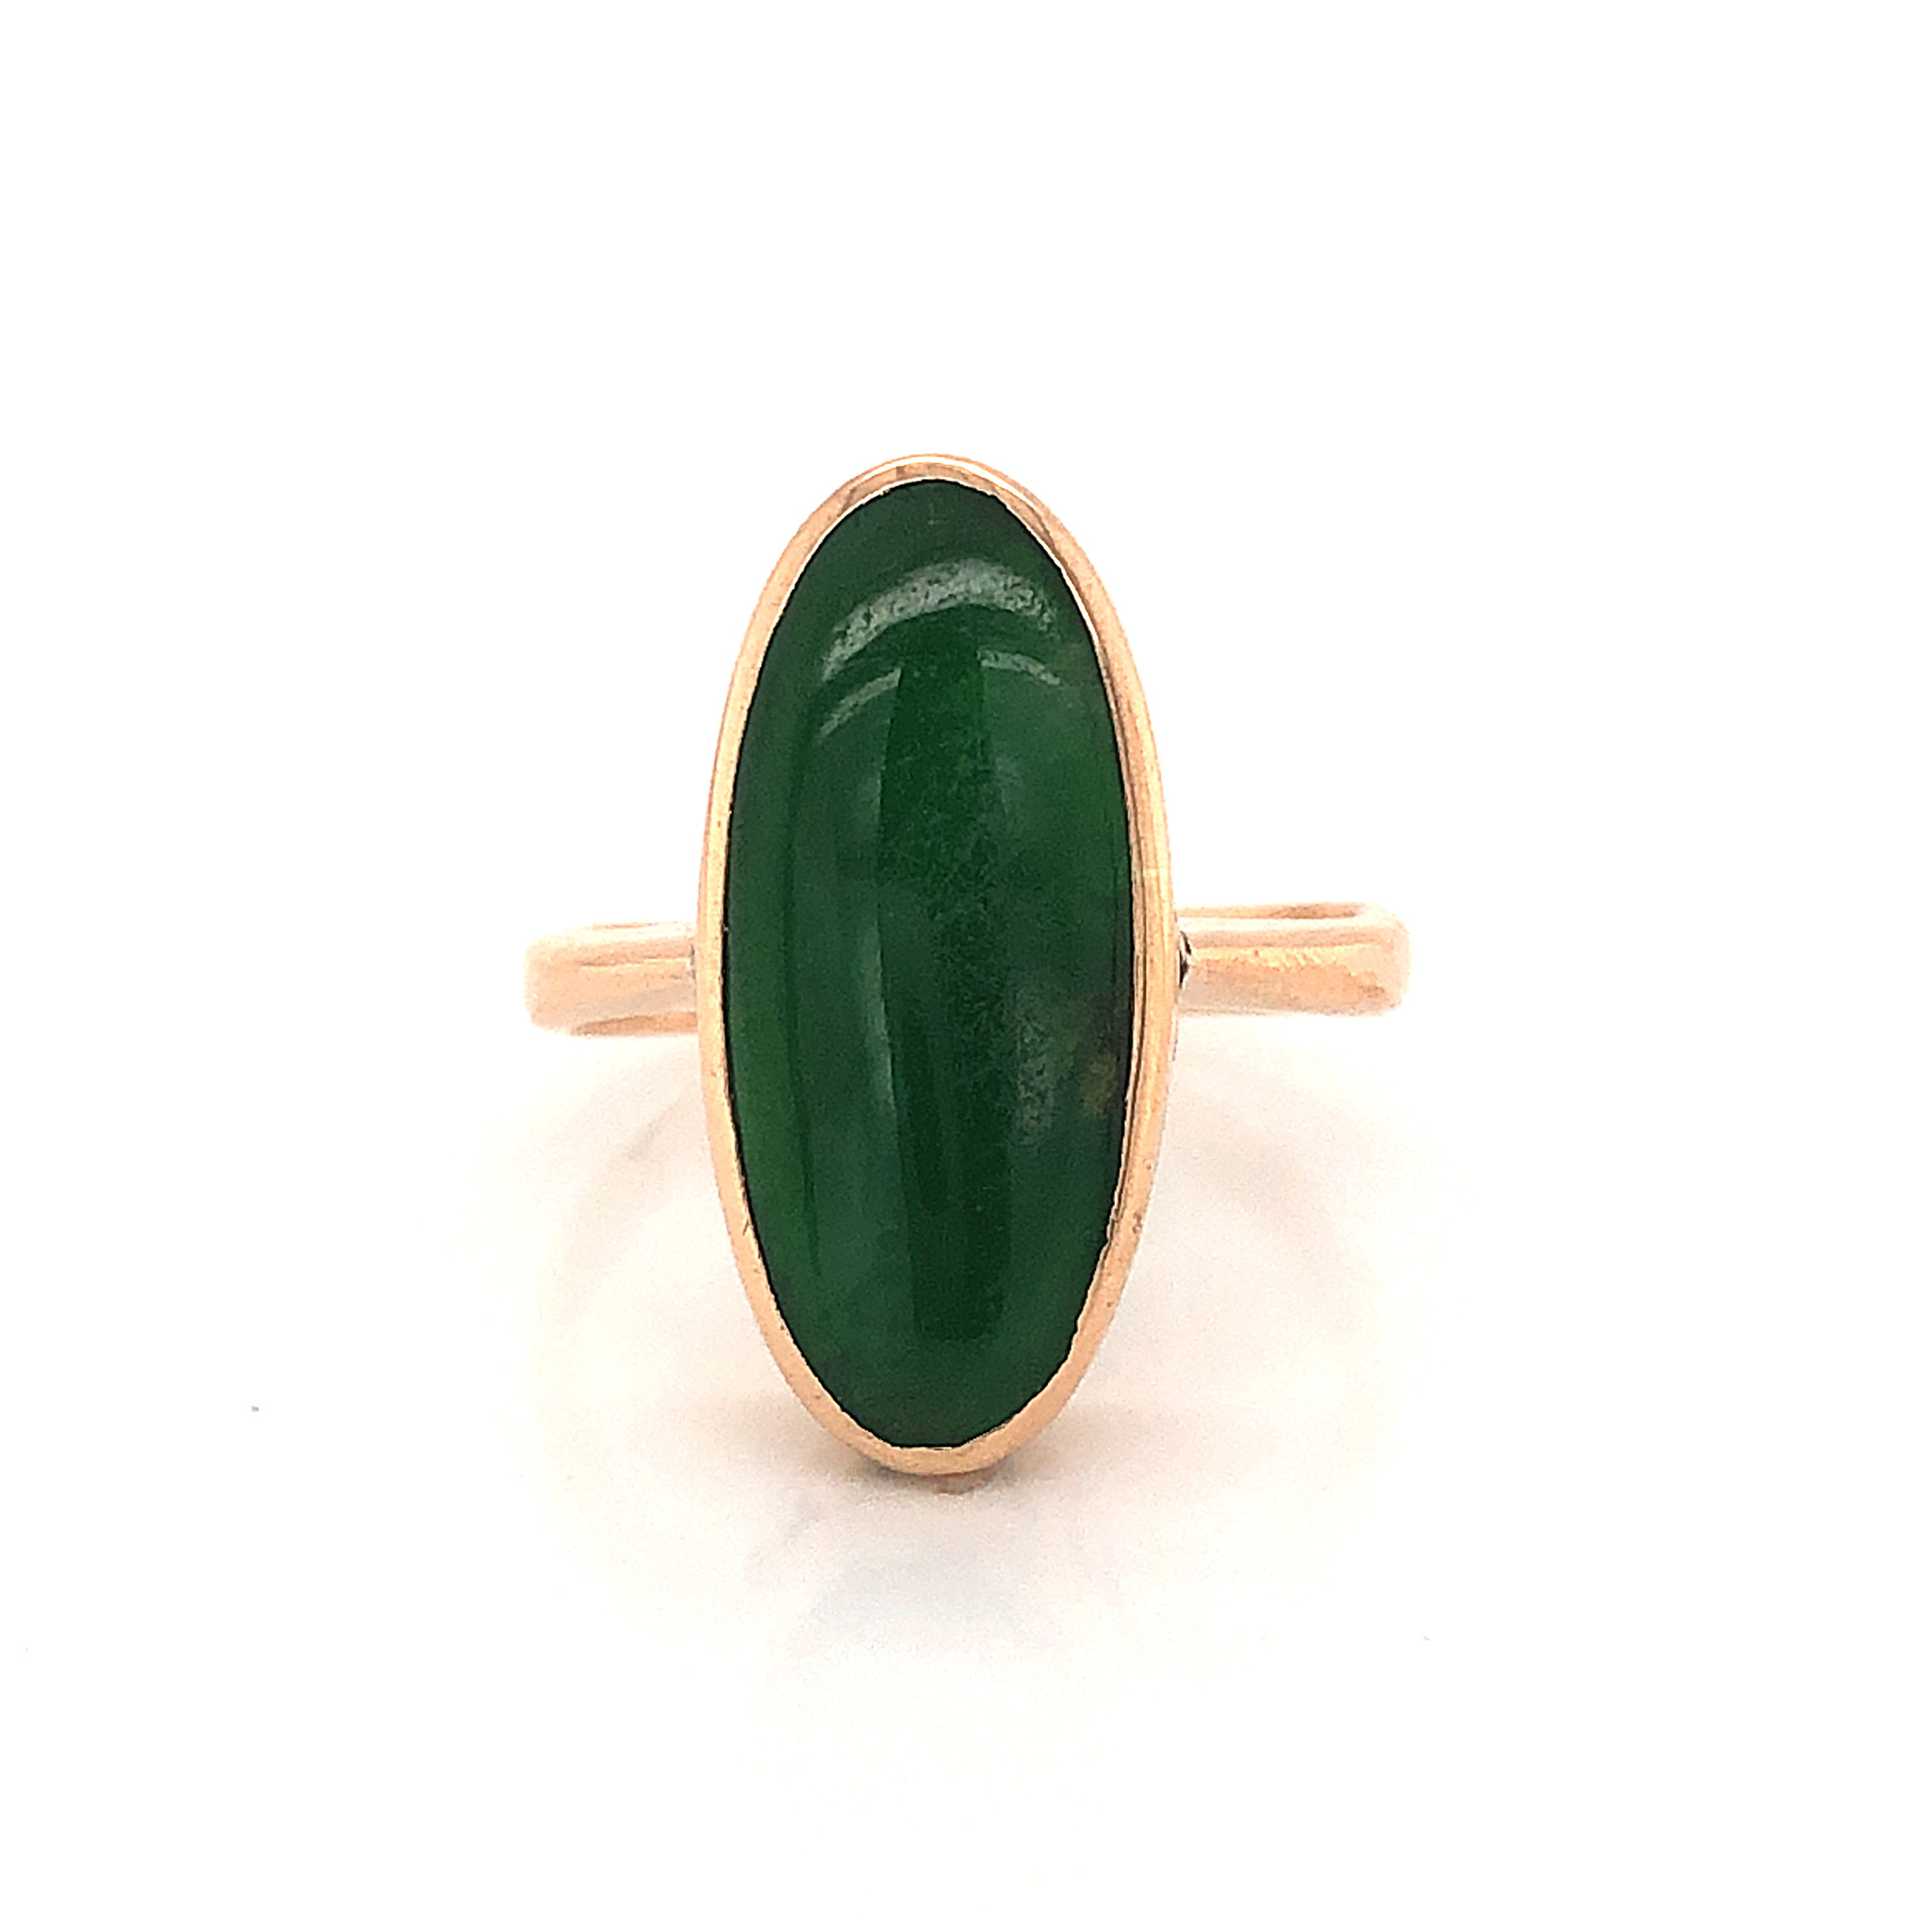 1 Gram Gold Forming Green Stone With Diamond Funky Design Ring For Men -  Style A785 at Rs 1470.00 | Gold Forming Jewellery | ID: 26030111712